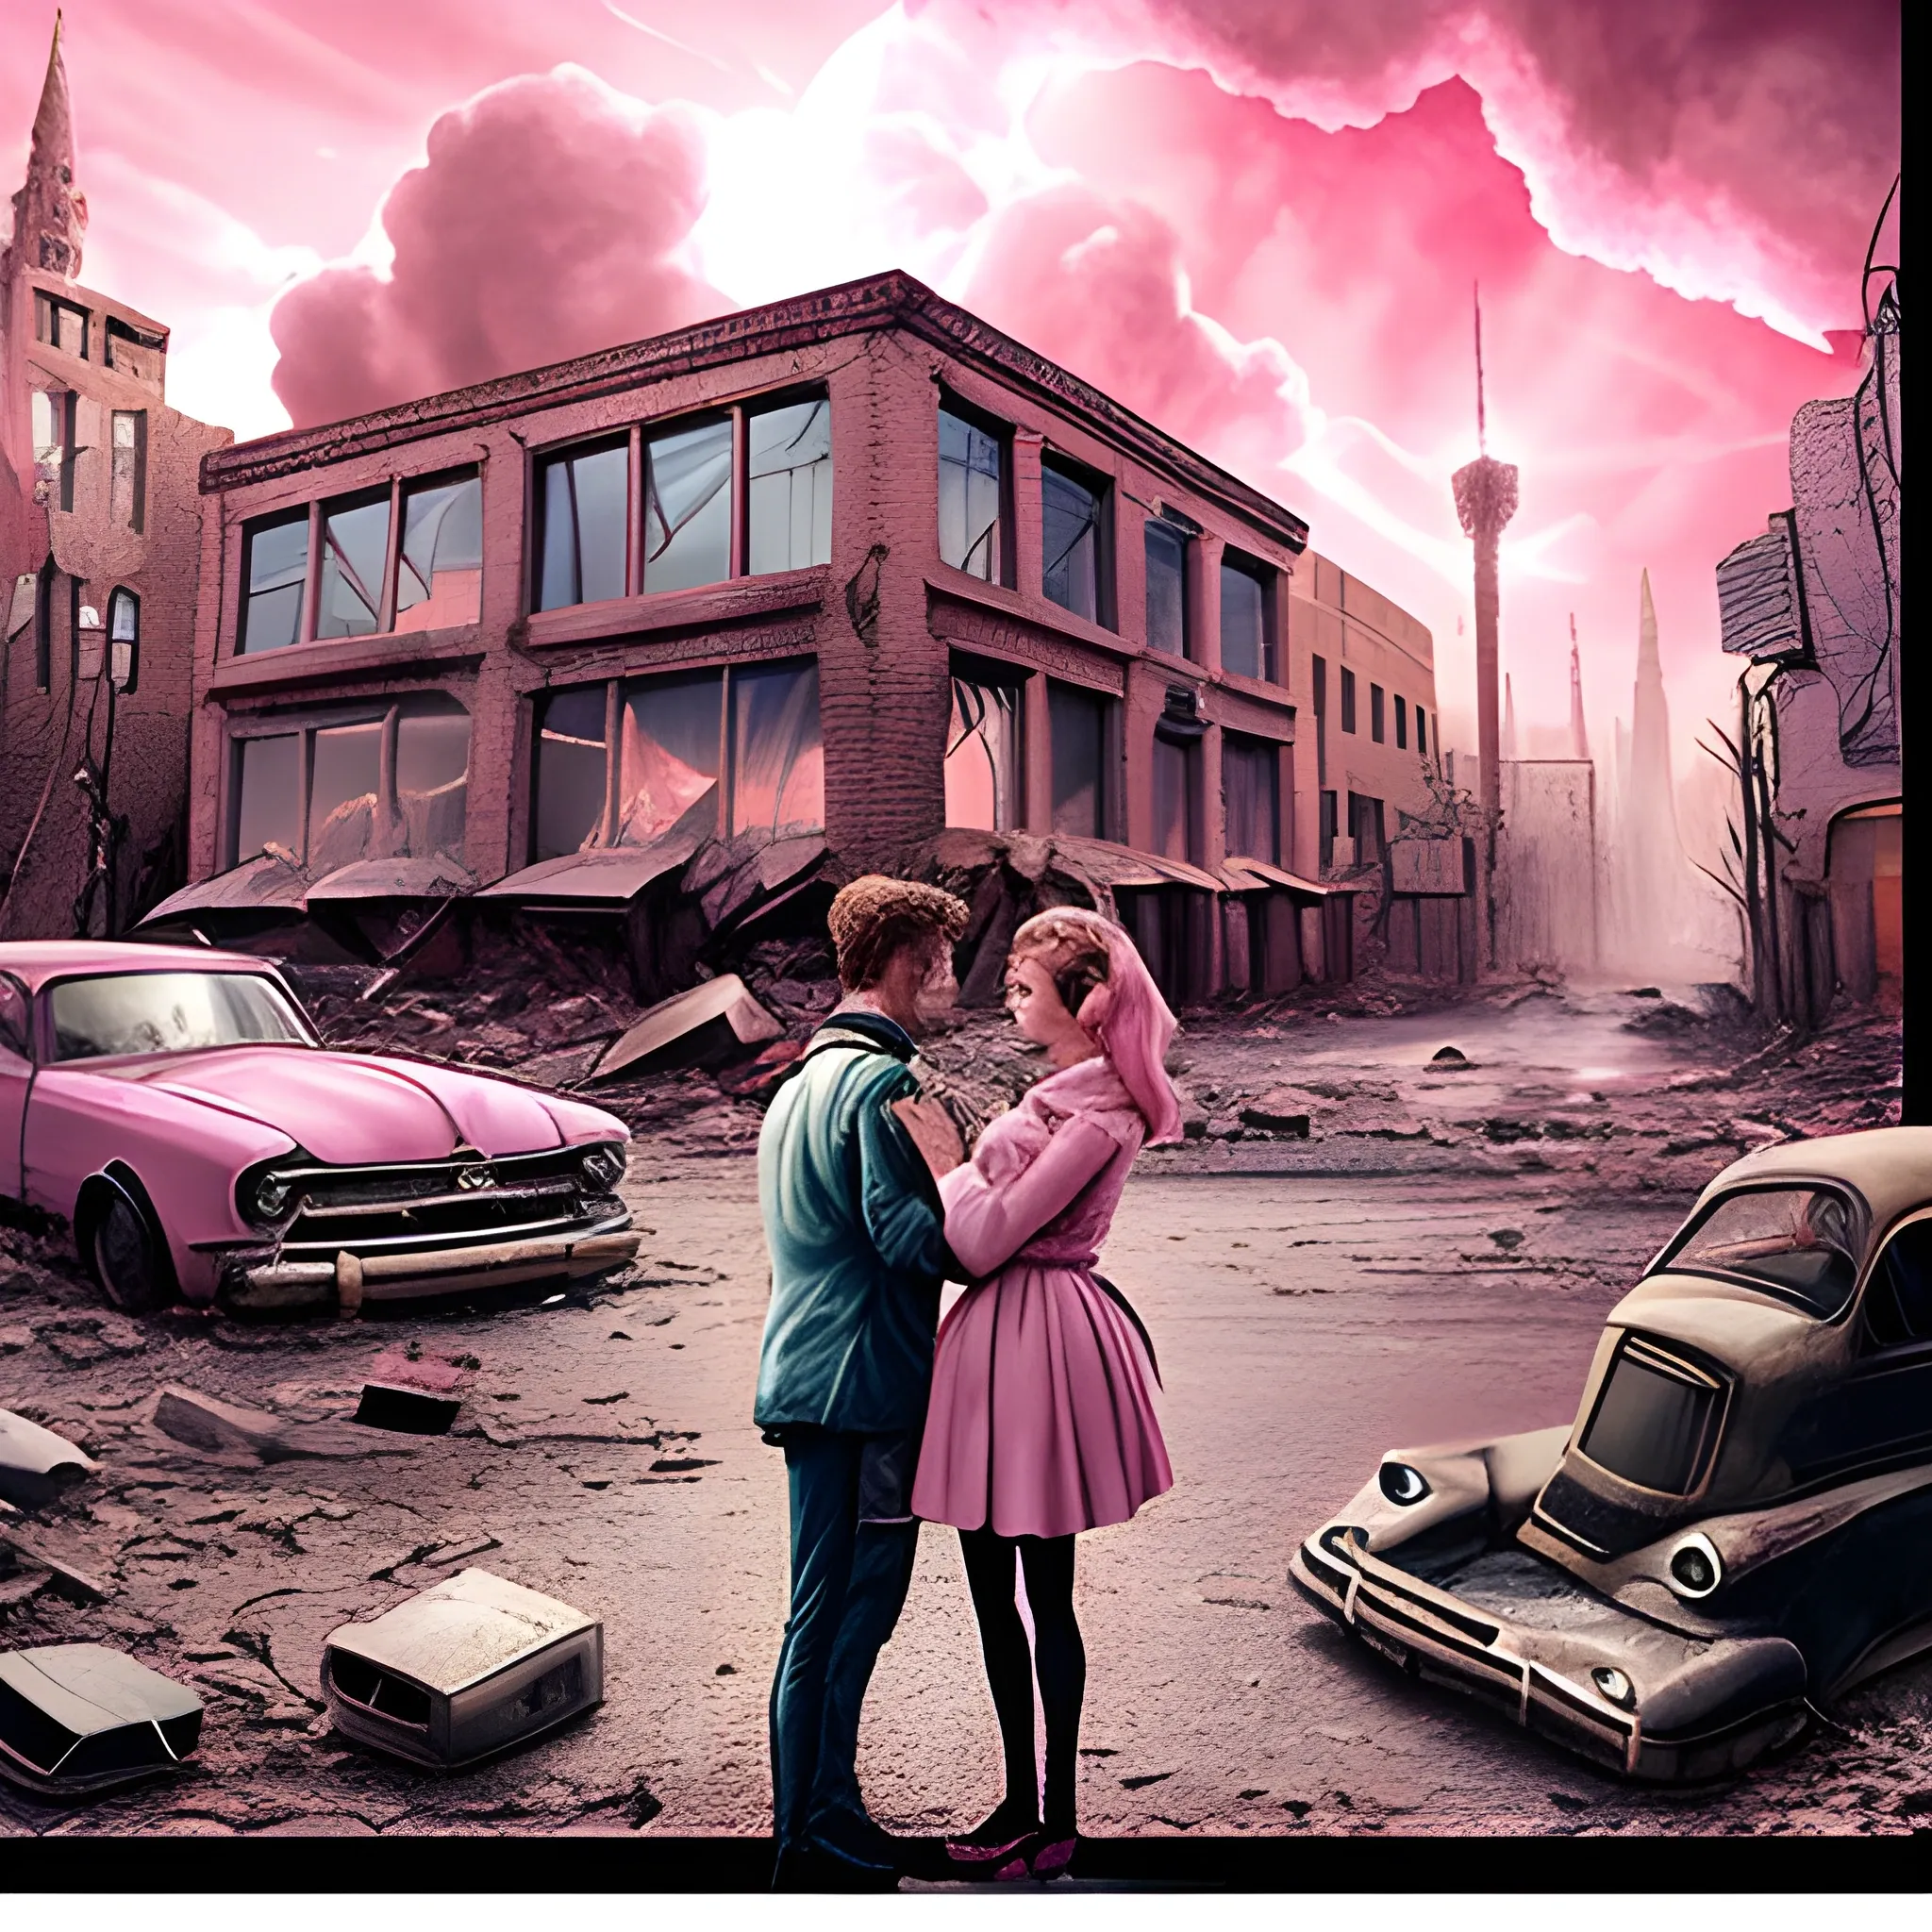 two lovers in front of an apocalyptic scene in a town. Cats are attacking the city. All is Pink and glittery